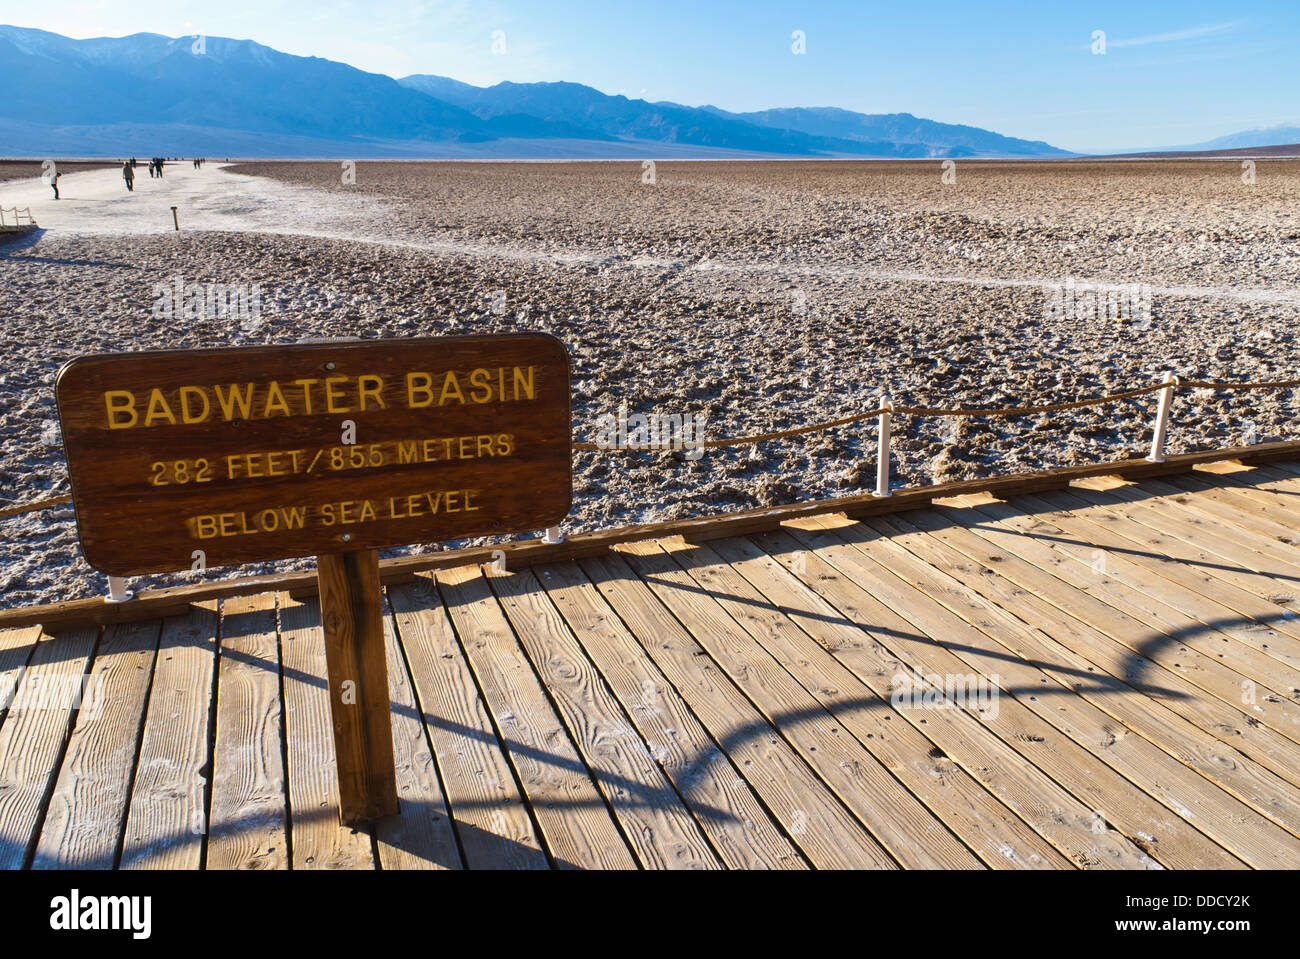 Badwater Basin in Death Valley National Park, lowest point in North America, elevation 282 ft (86 m) below sea level. Stock Photo